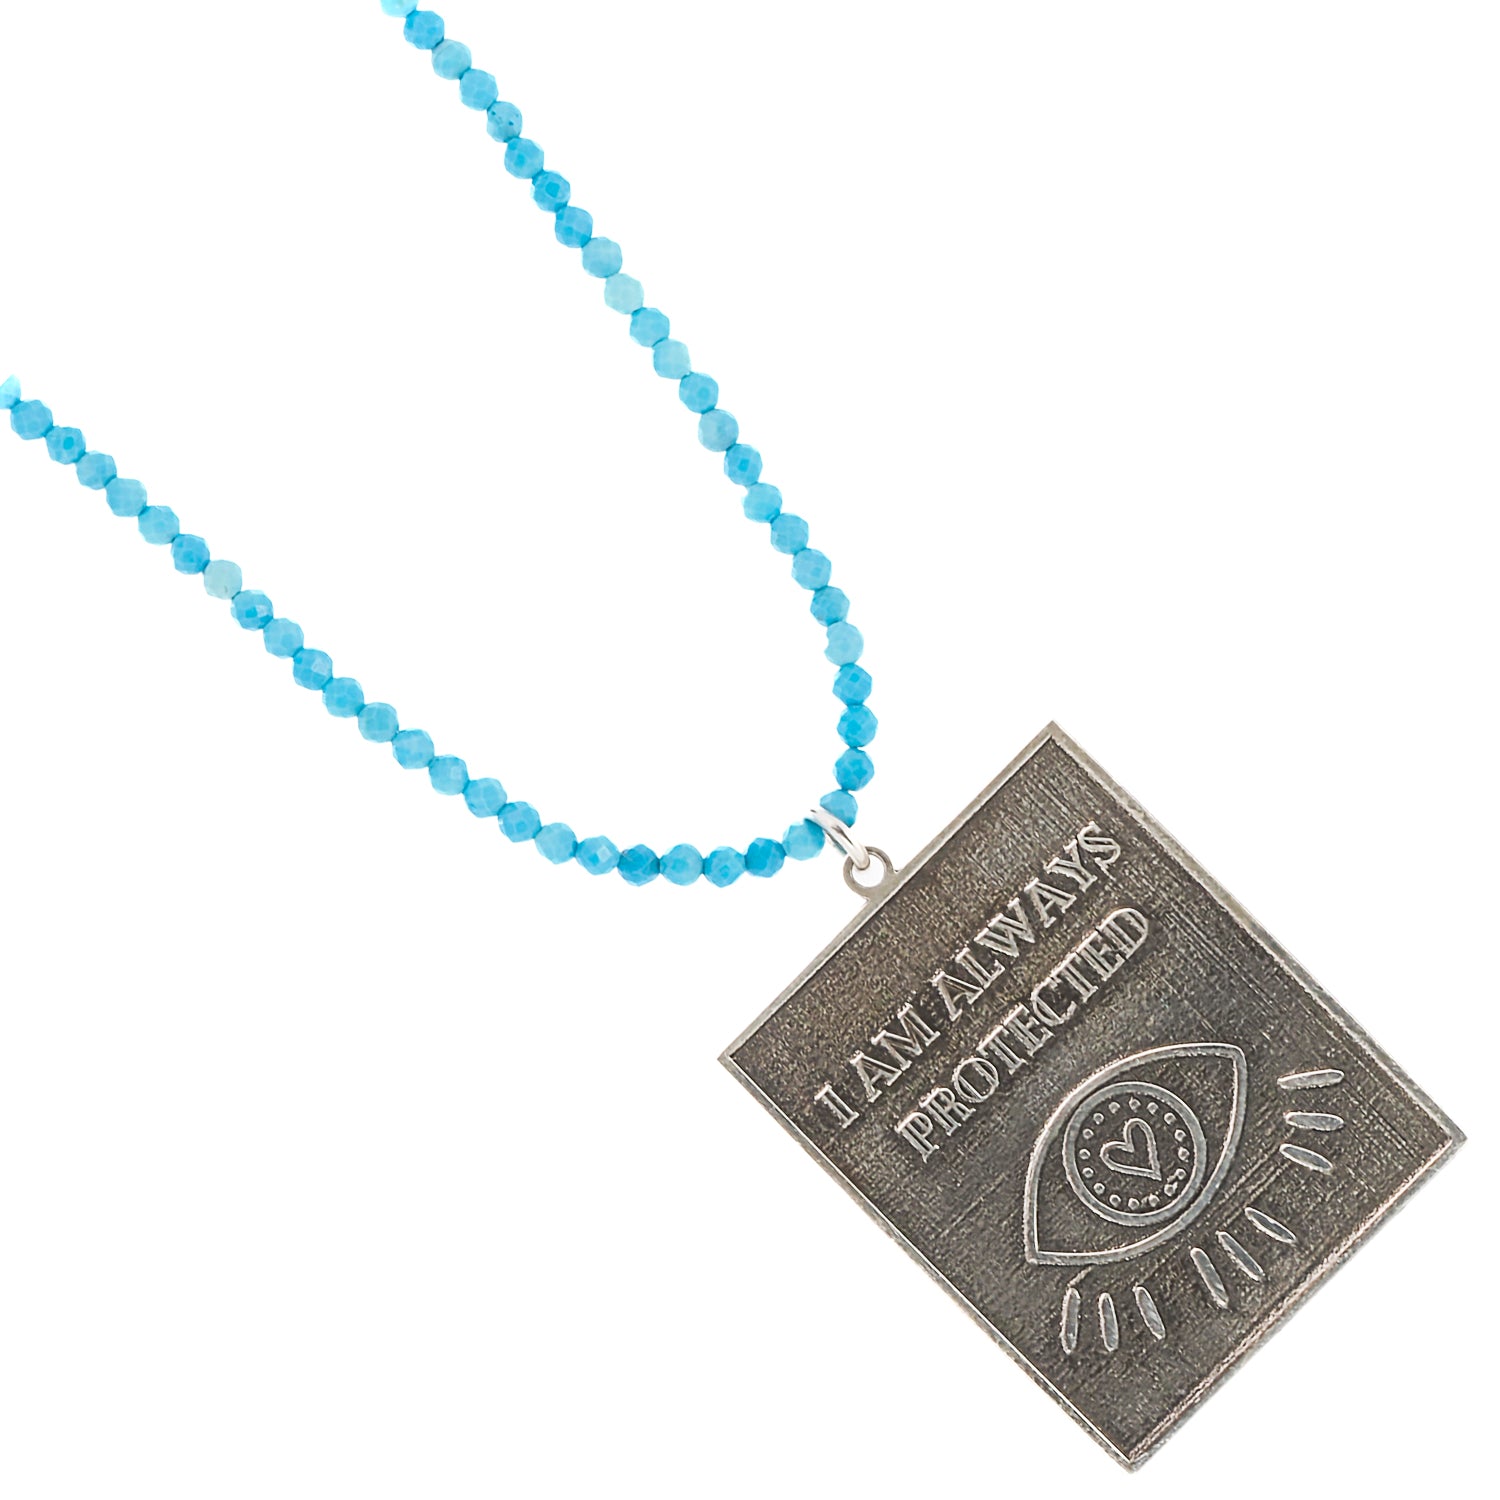 The beautiful combination of turquoise stone beads in the Turquoise 'I Am Always Protected' Necklace